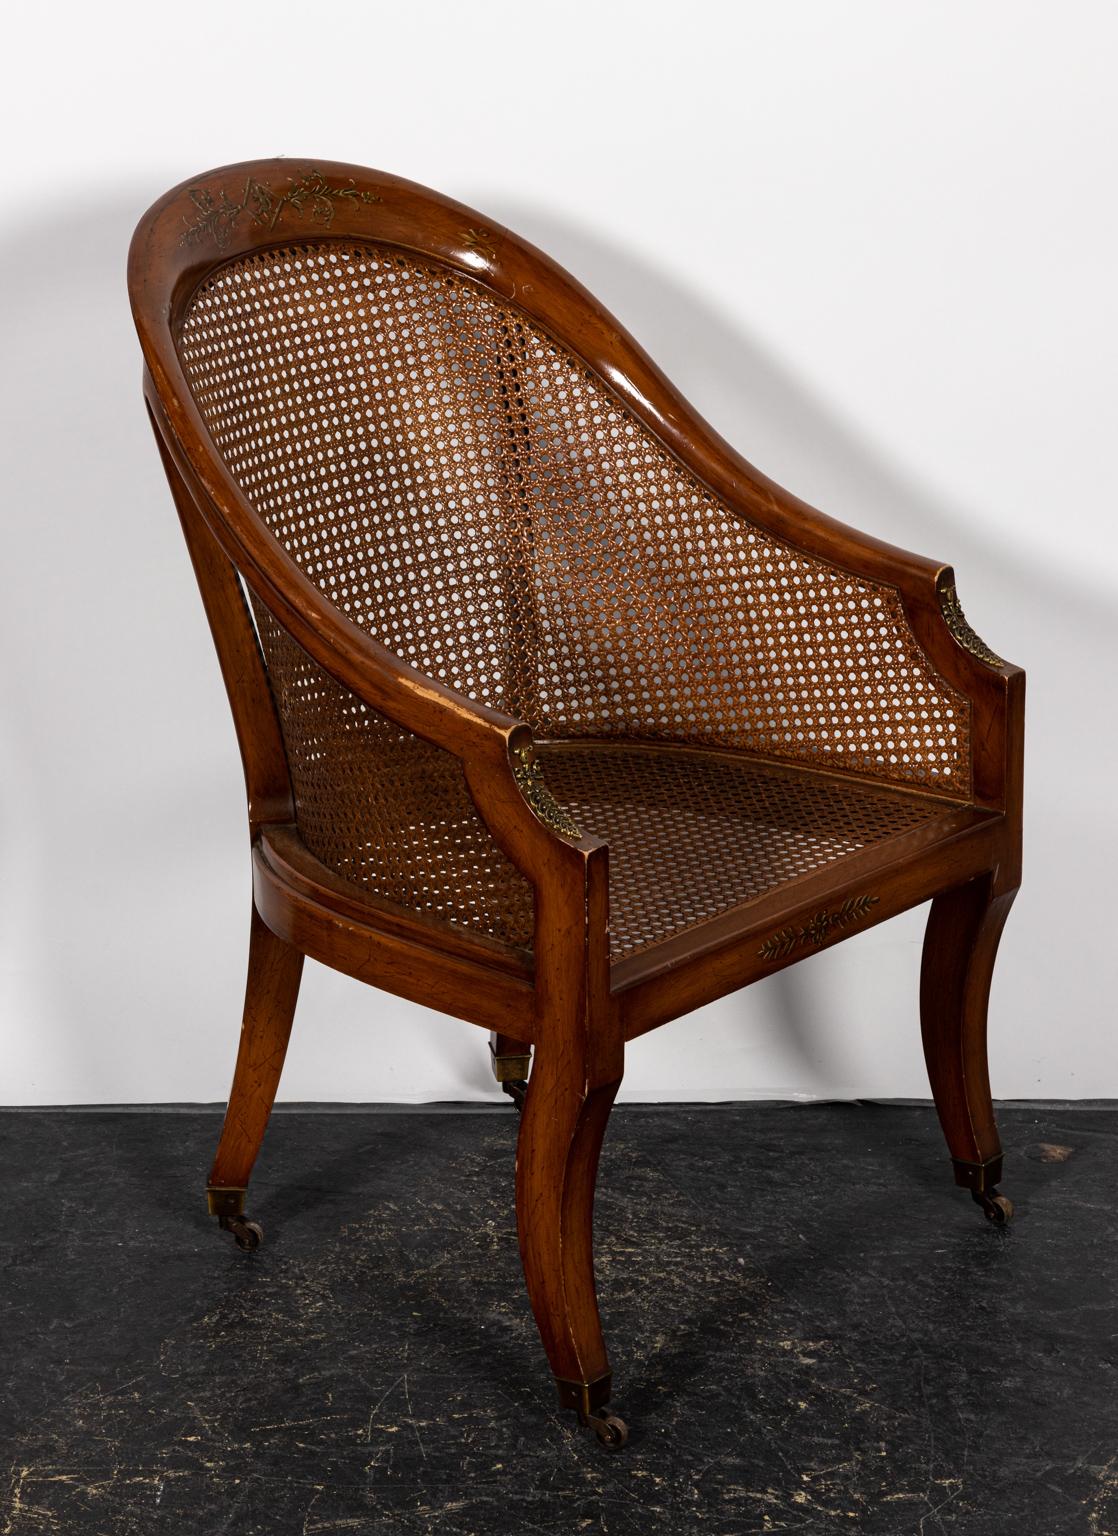 Cane Pair of Walnut Spoon Back Chairs